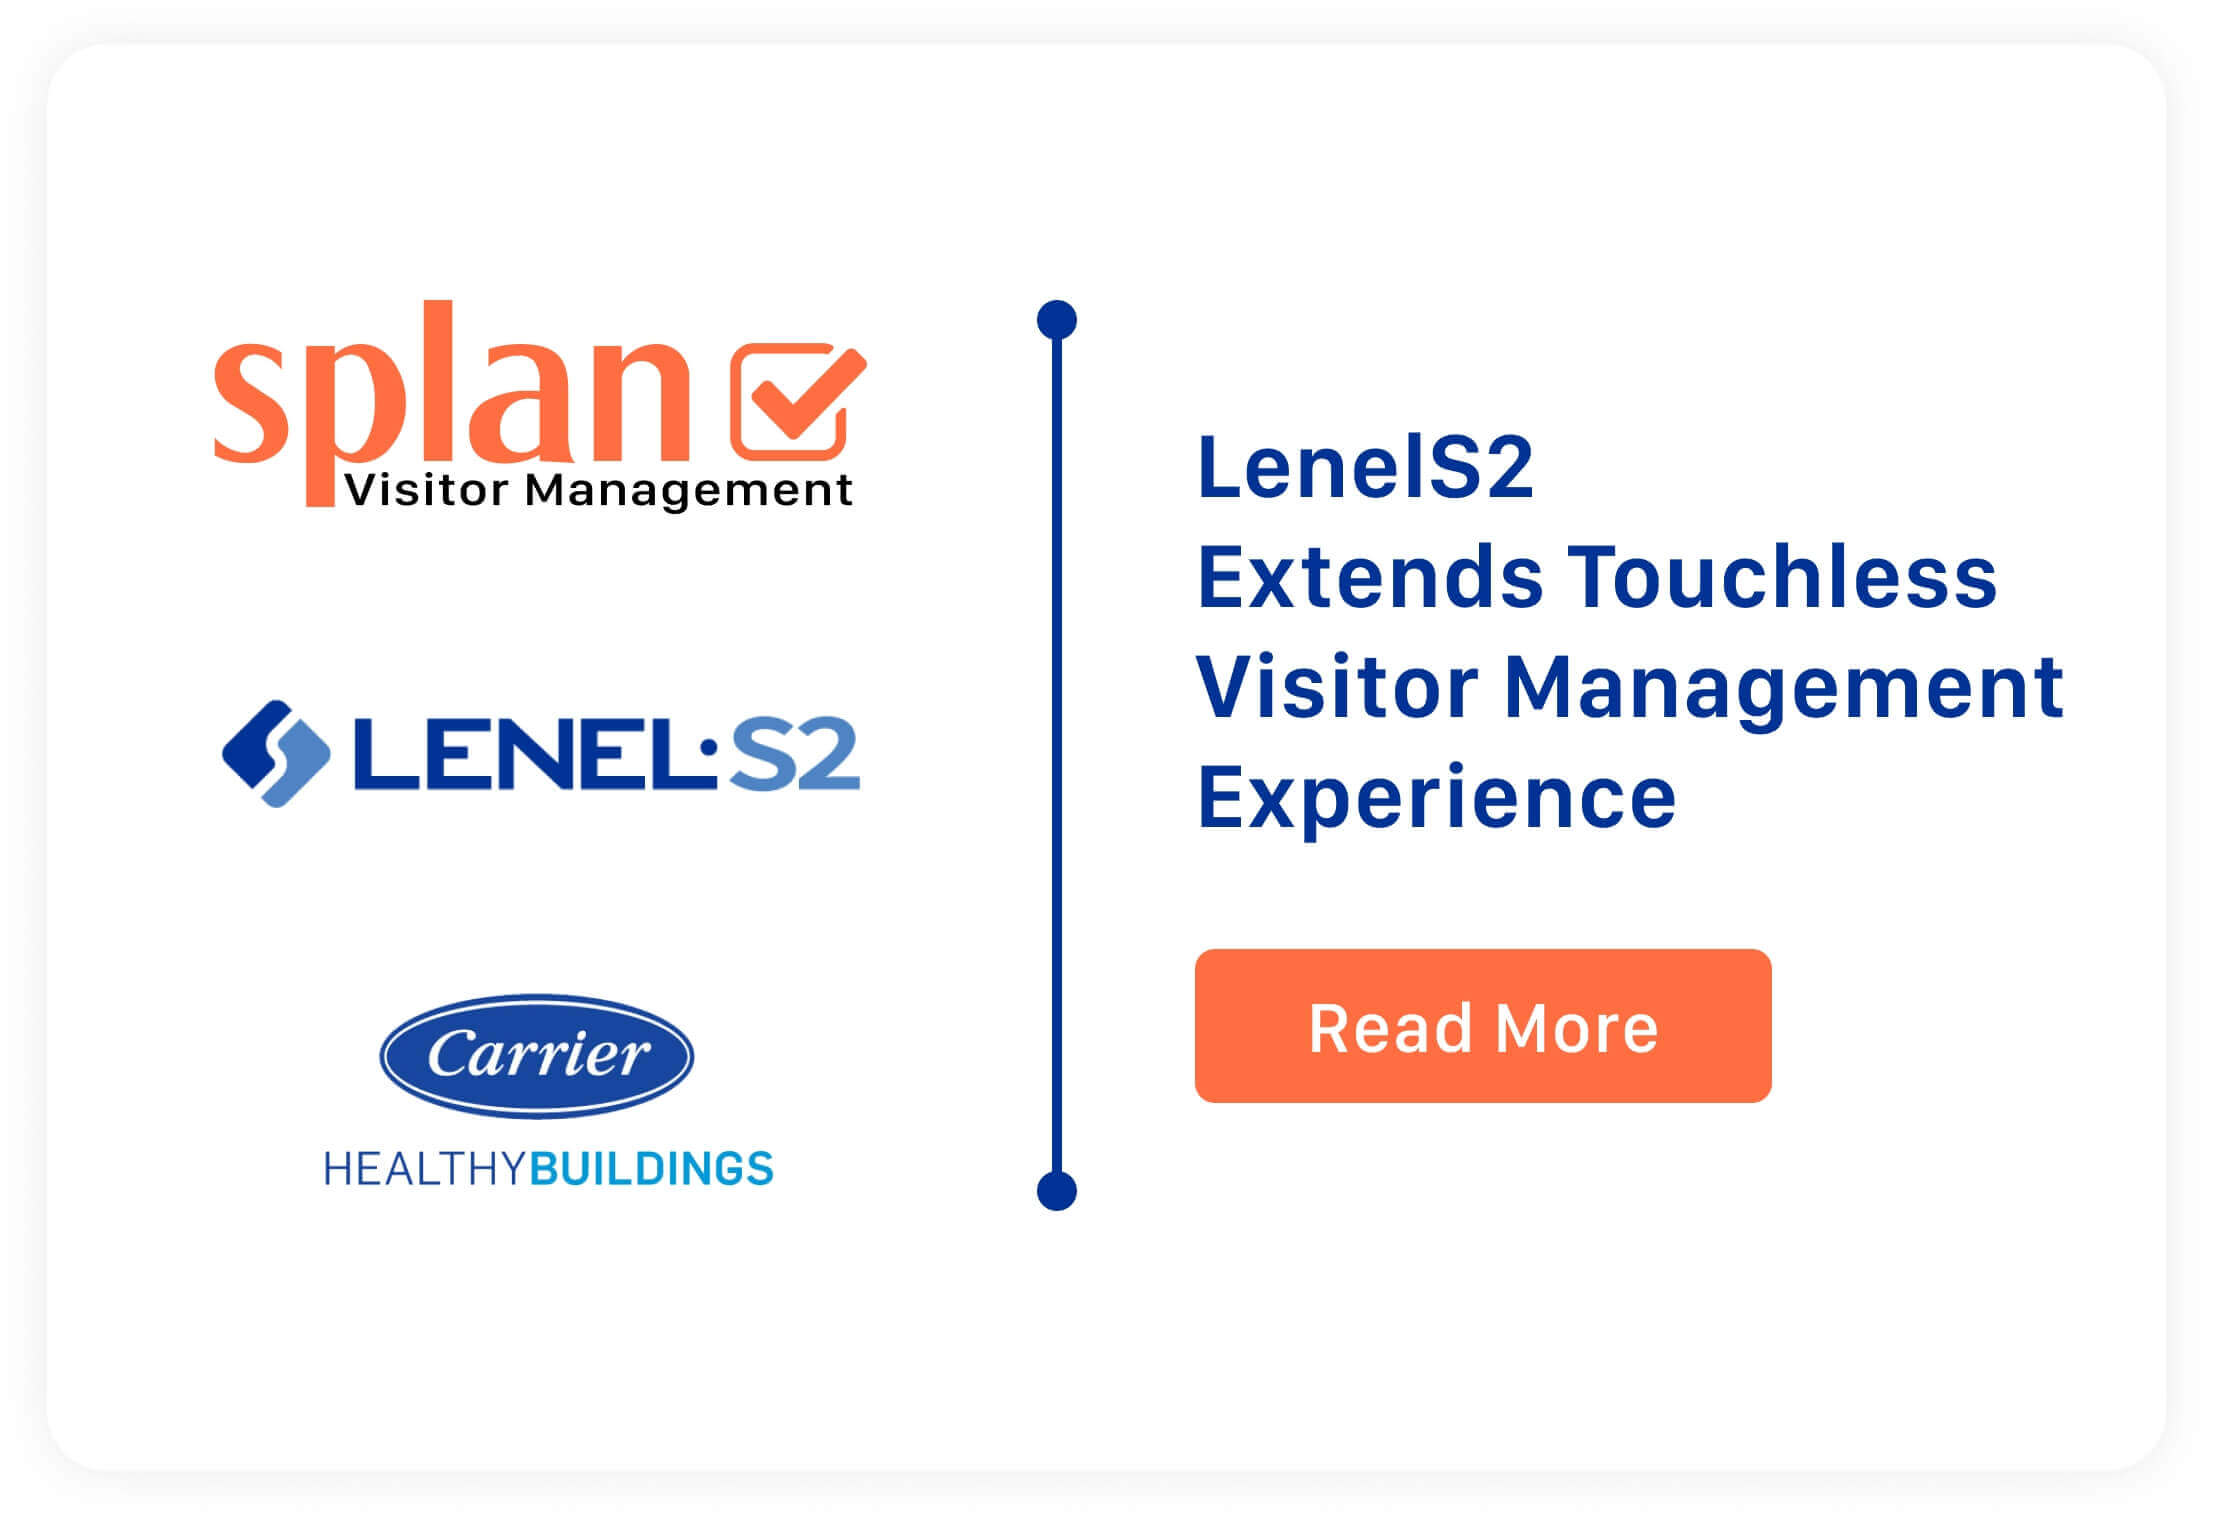 splan lenels2 careeer healthybuildings touchless visitor management experiance